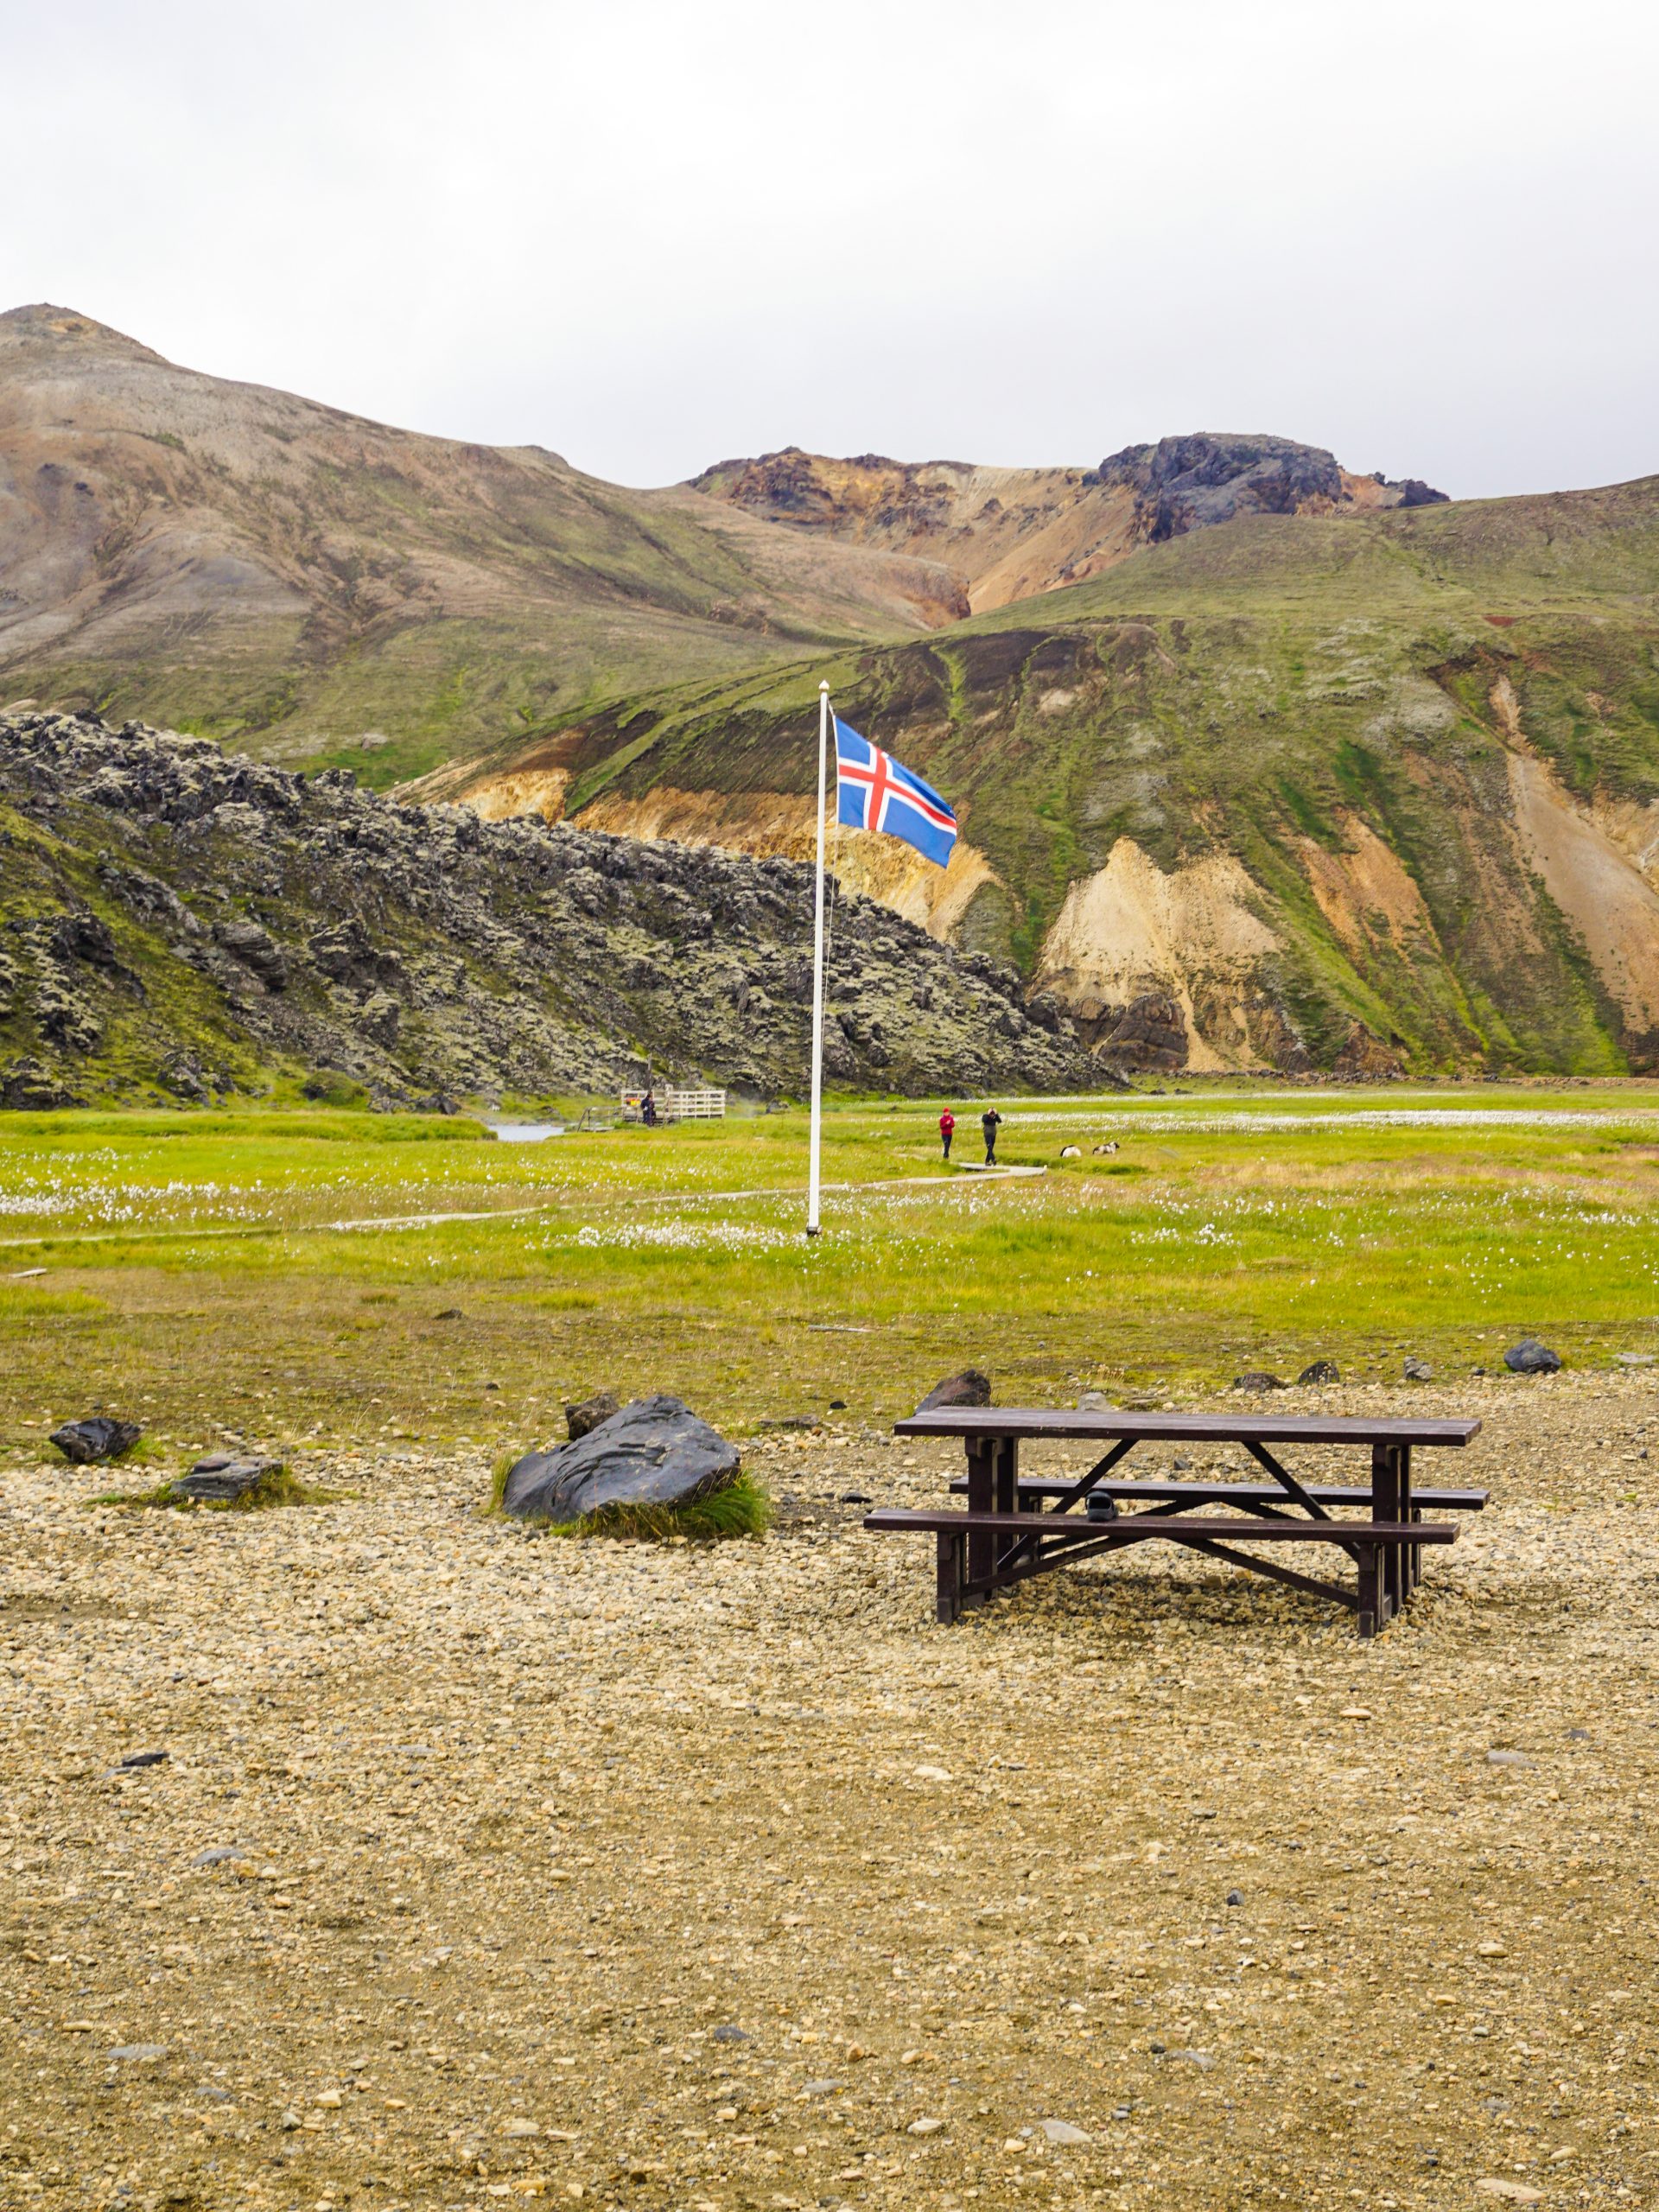 The Icelandic Flag at the Landmannalaugar campsite in the mountains